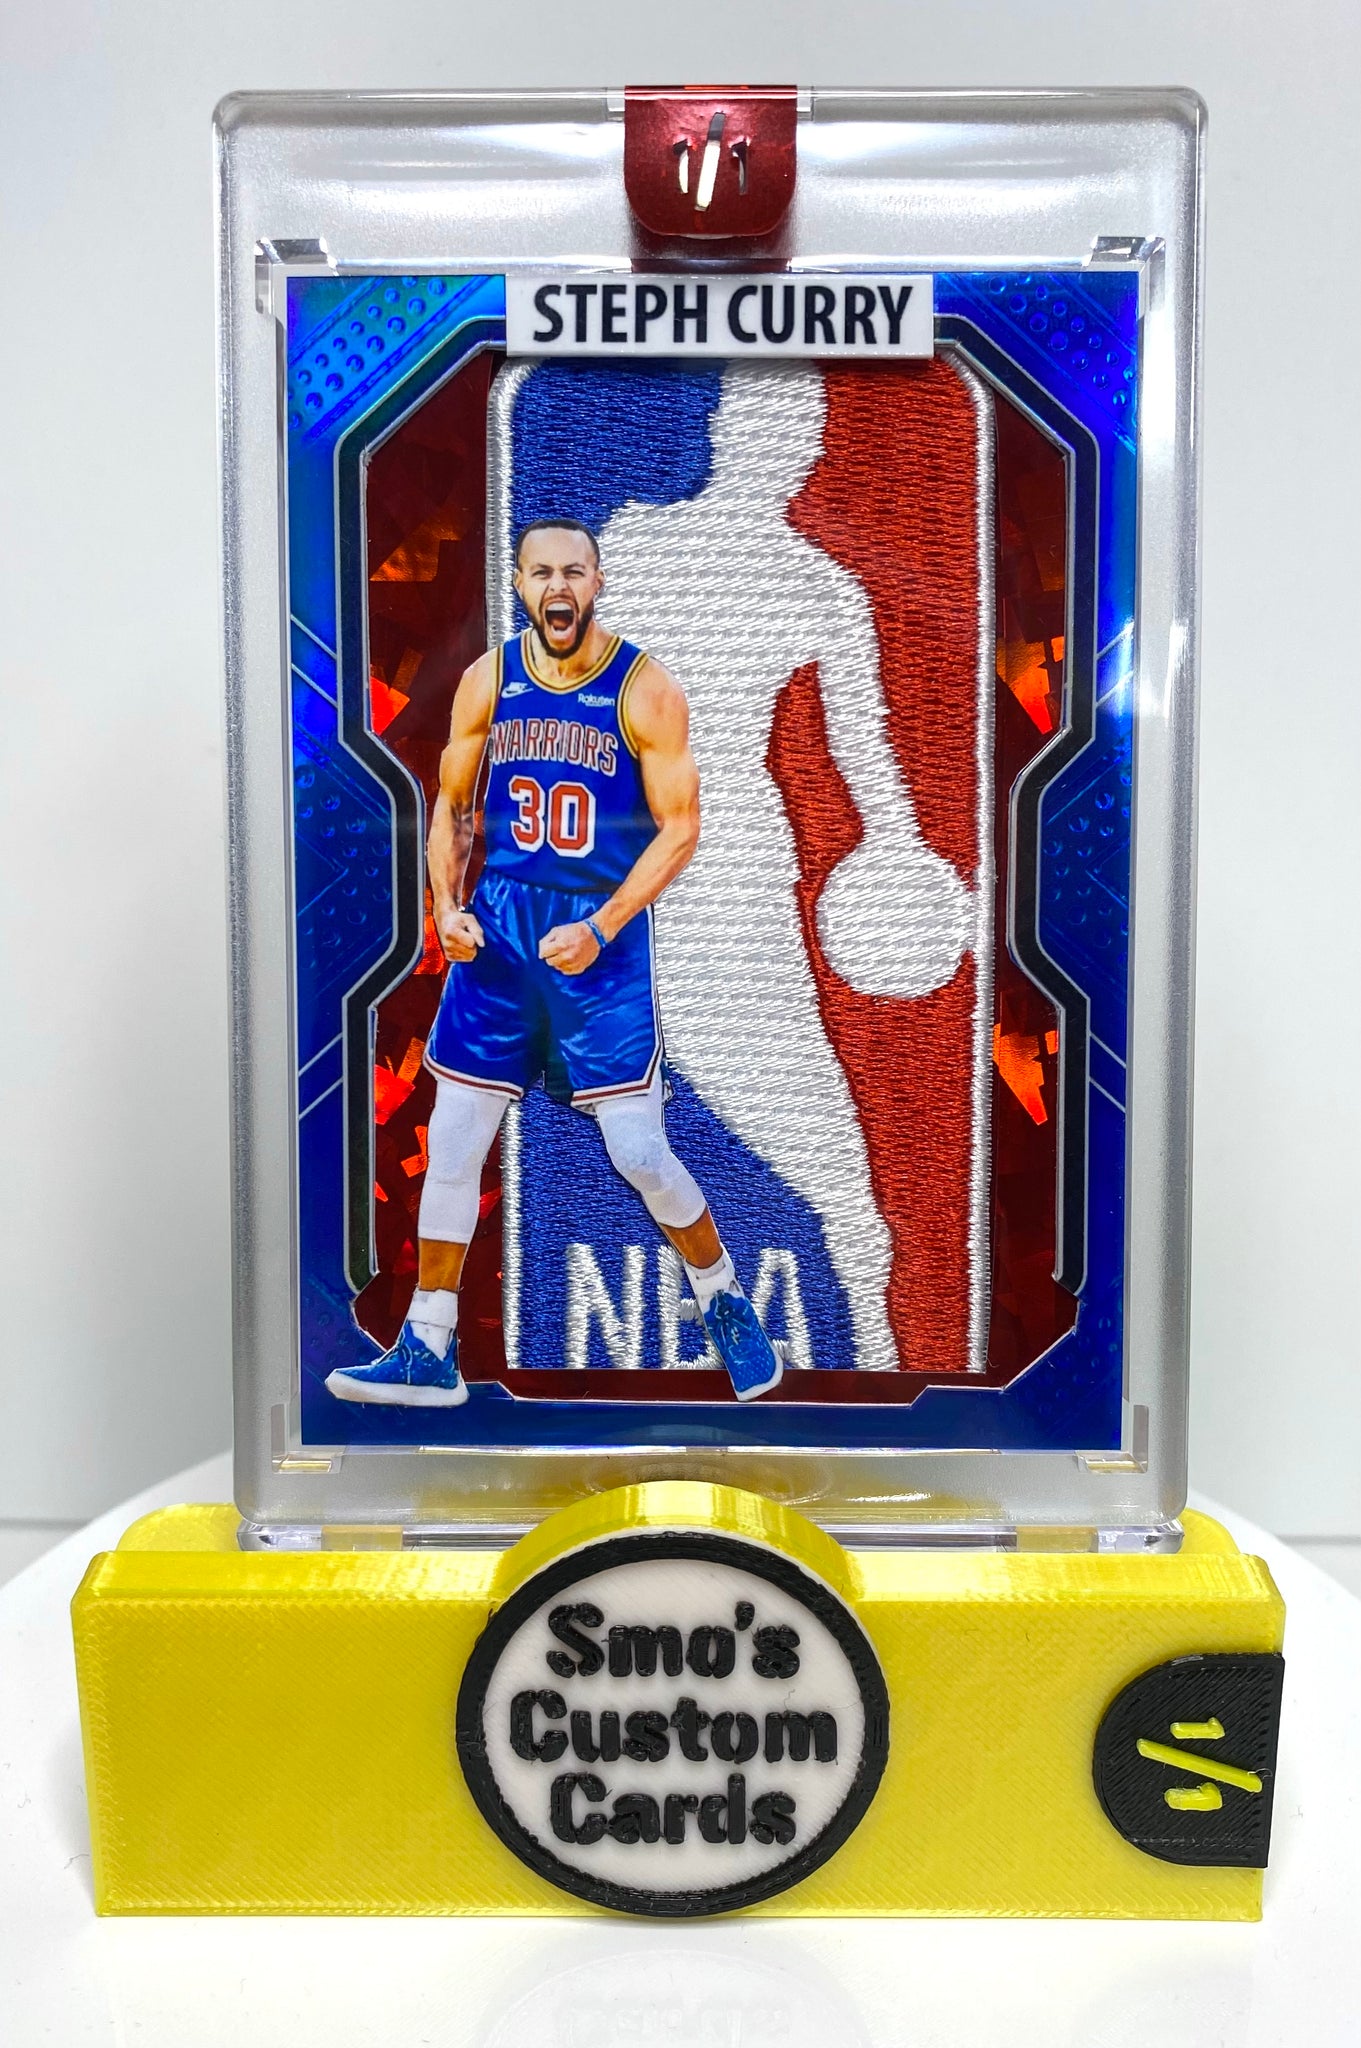 Steph Curry NBA All Time 3pt Record Breaker Logoman Patch 1/1